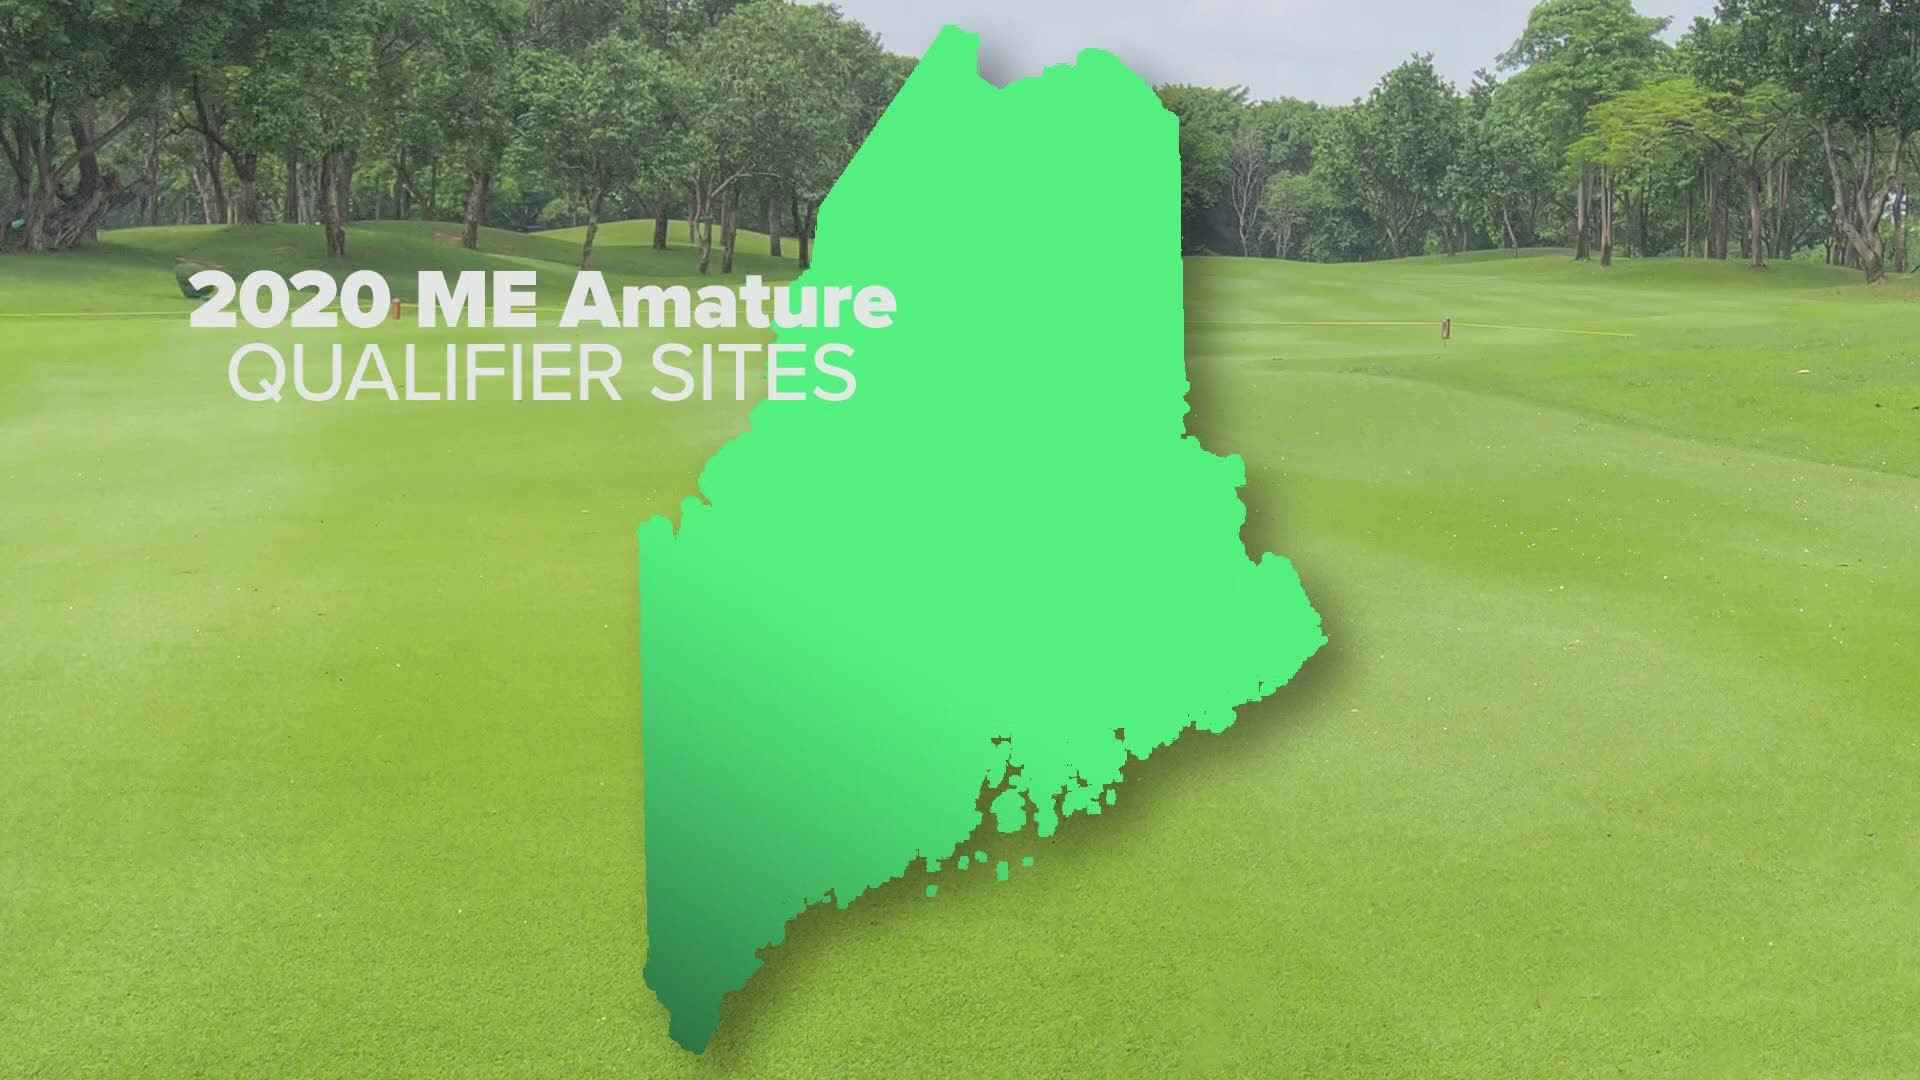 As Maine's competitive golf season arrives, courses are seeing a growing interest in the sport